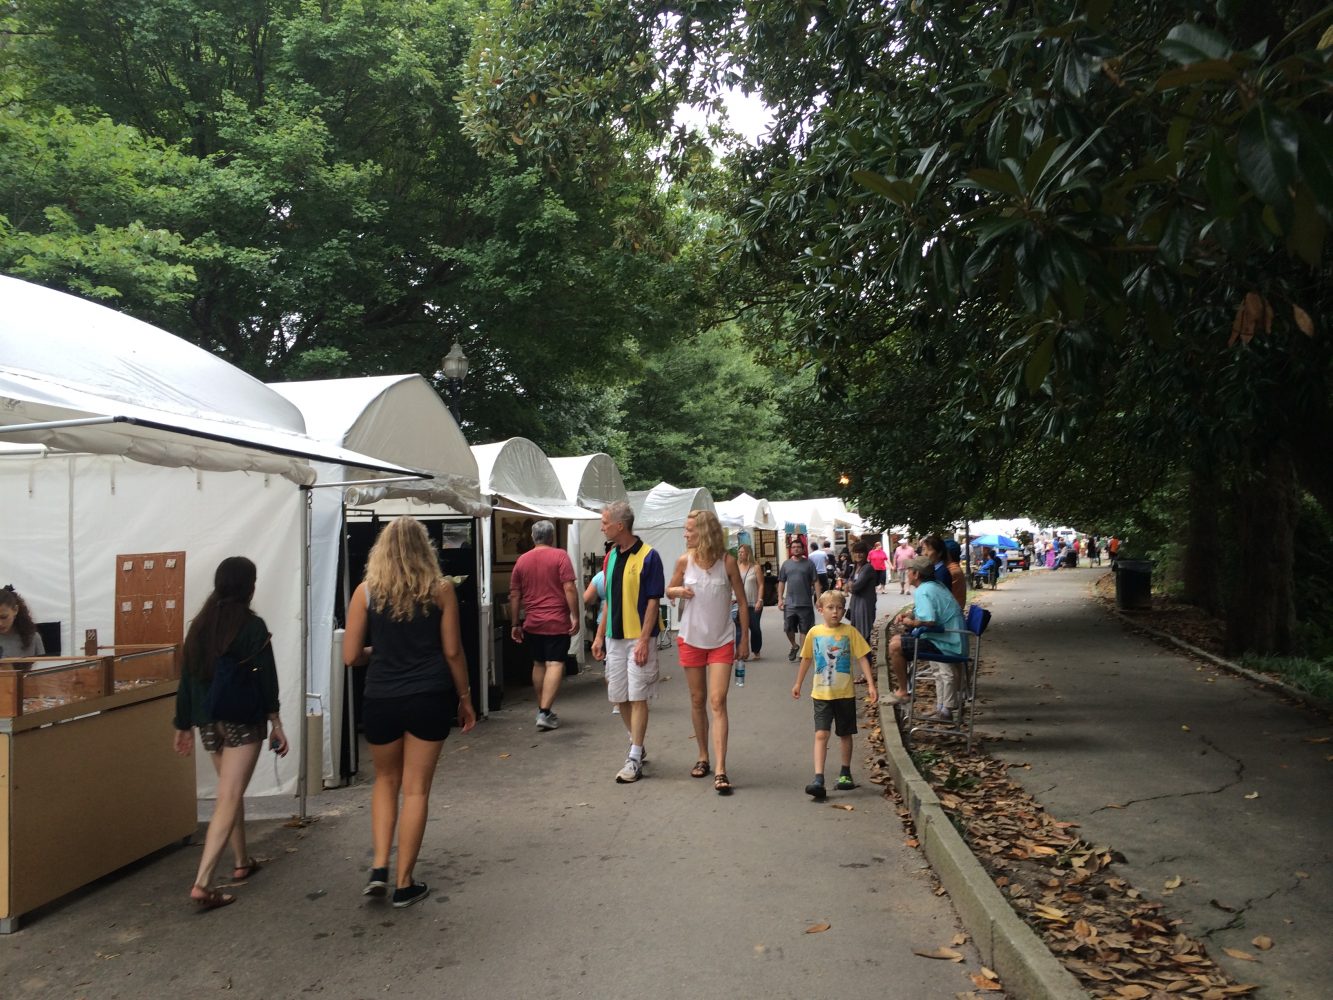 PIEDMONT ART: The Atlanta Arts Festival had art from 12 mediums of art represented: clay, drawings/graphics/printmaking, fiber/leather,
glass, jewelry, metal, 2-D mixed media, 3-D mixed media, oil/acrylic painting, watercolor/pastel painting, photography/digital art and wood.